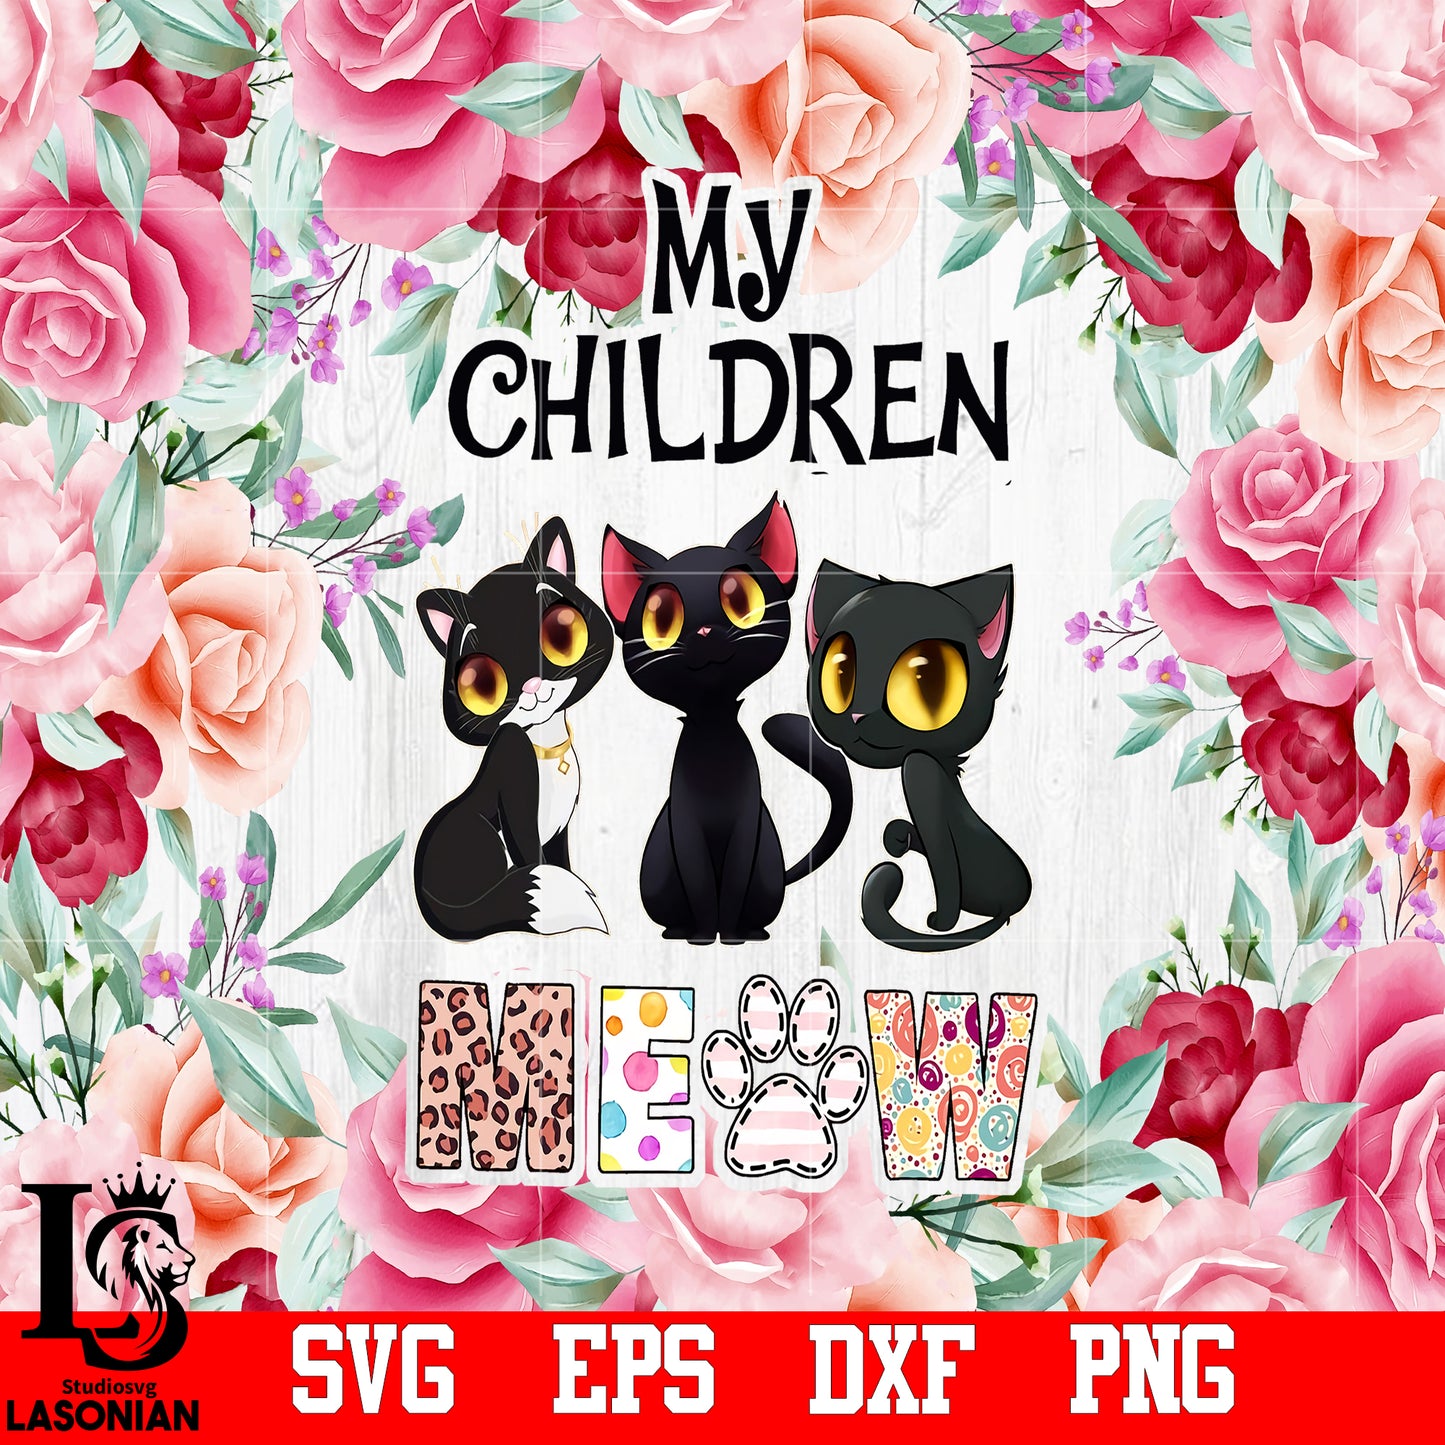 My children Meow Cat Png file